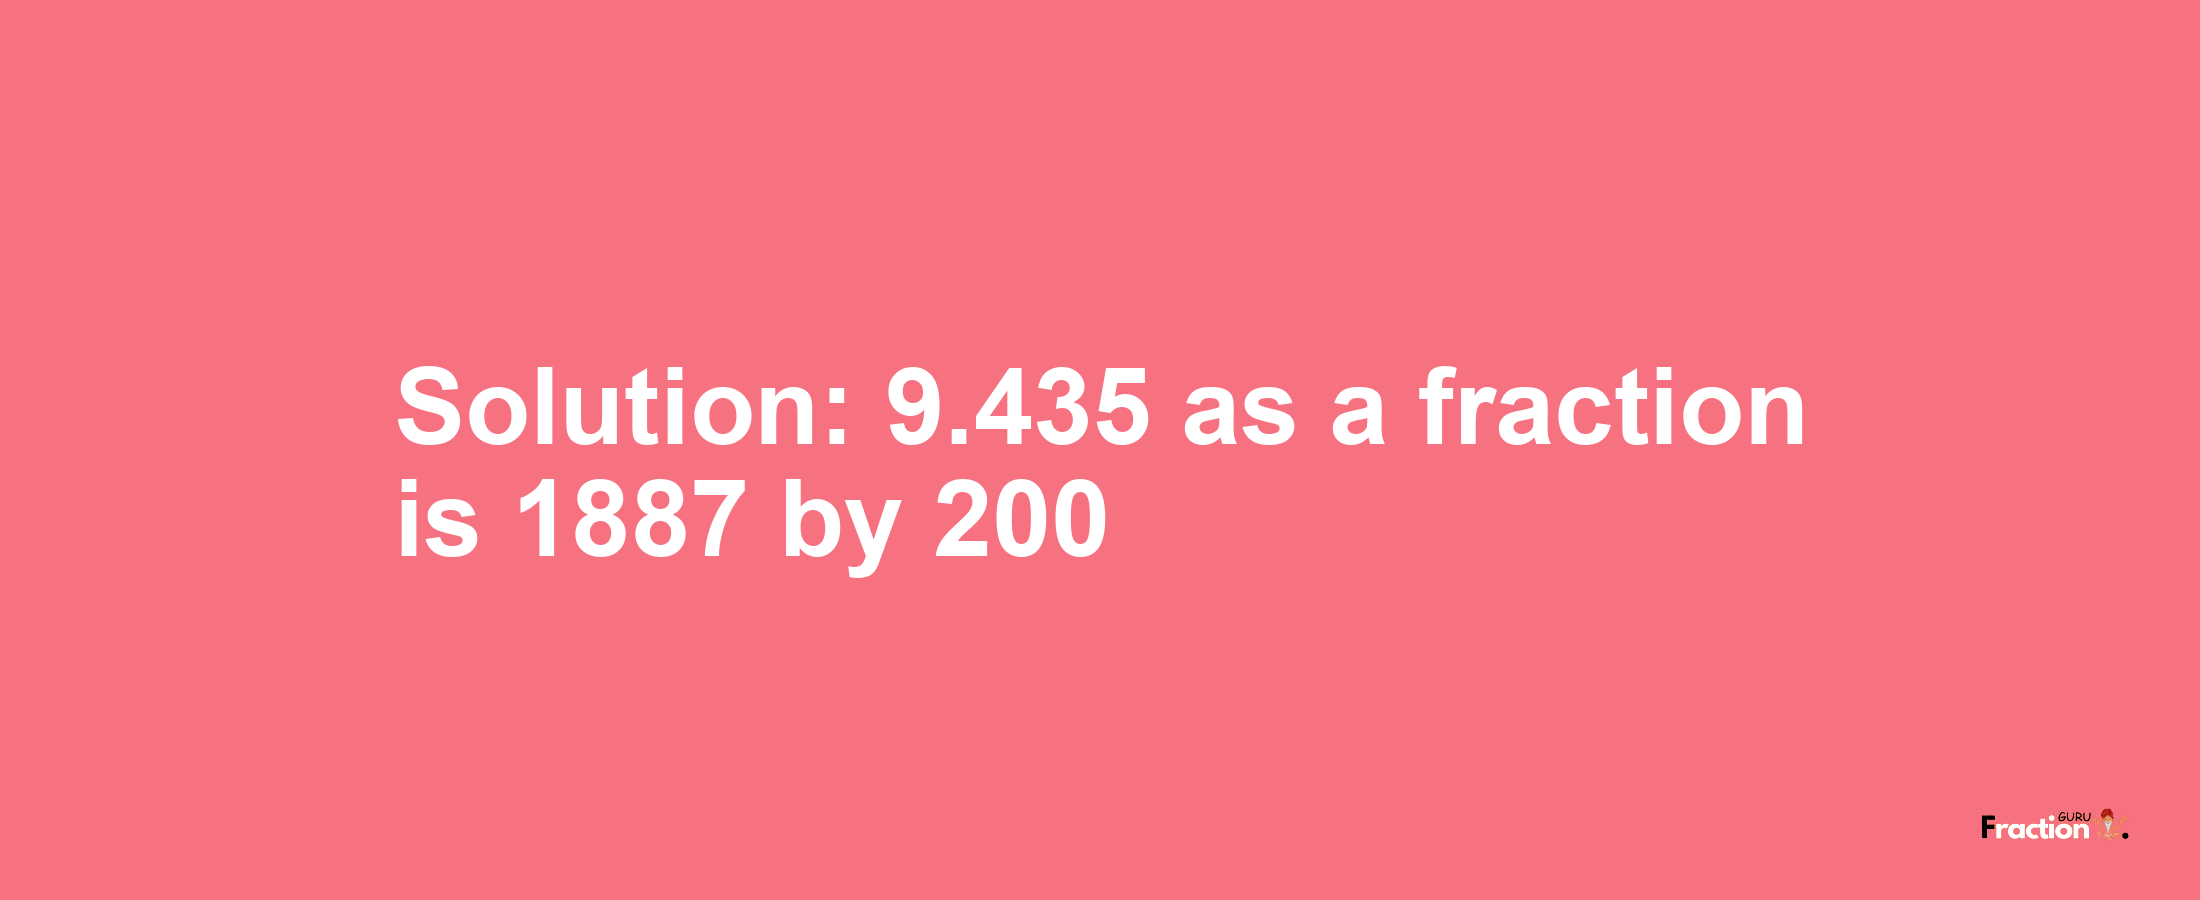 Solution:9.435 as a fraction is 1887/200